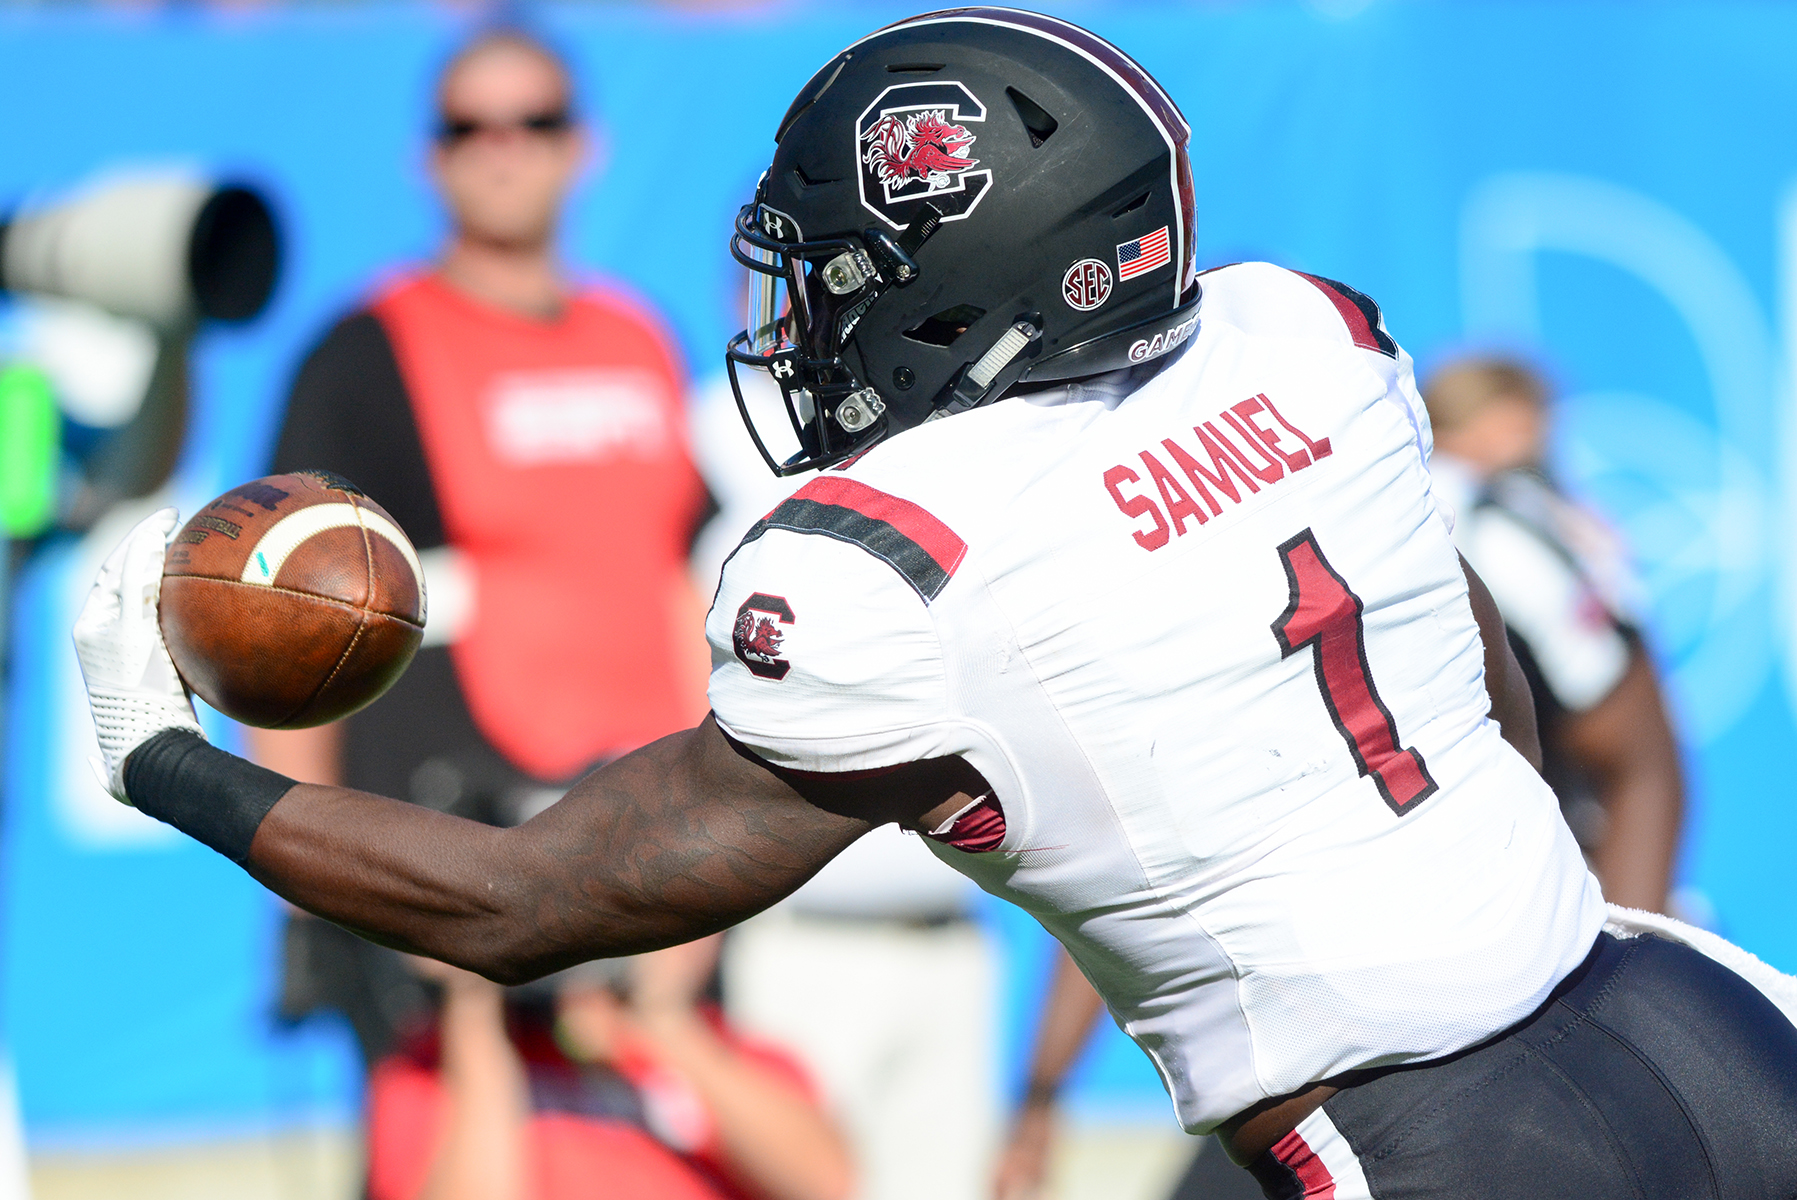 Samuel Named to Two All-America Teams